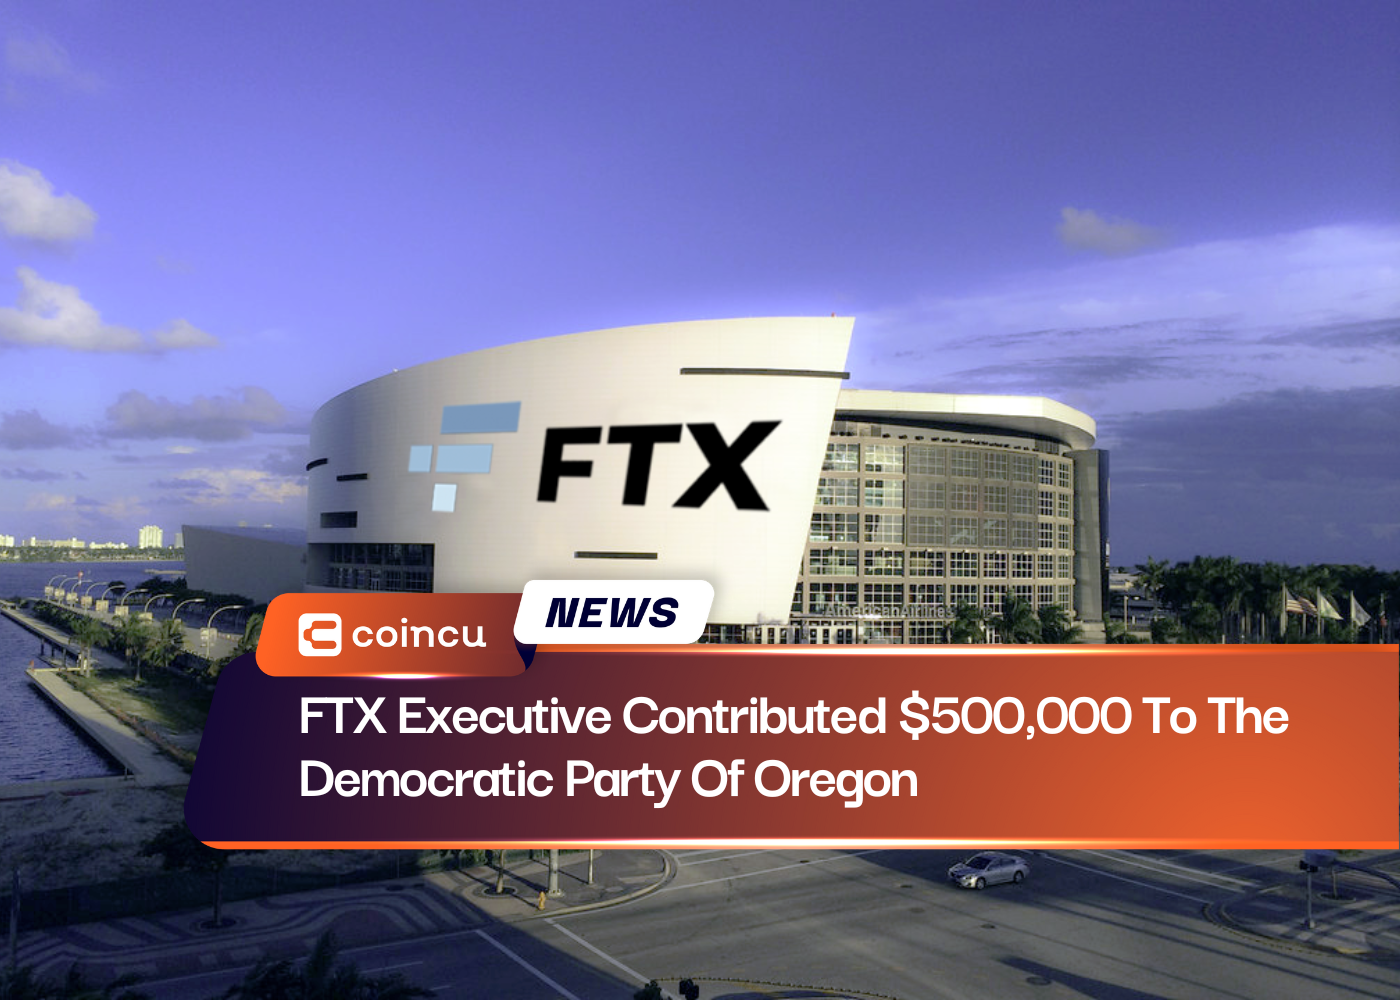 FTX Executive Contributed $500,000 To The Democratic Party Of Oregon